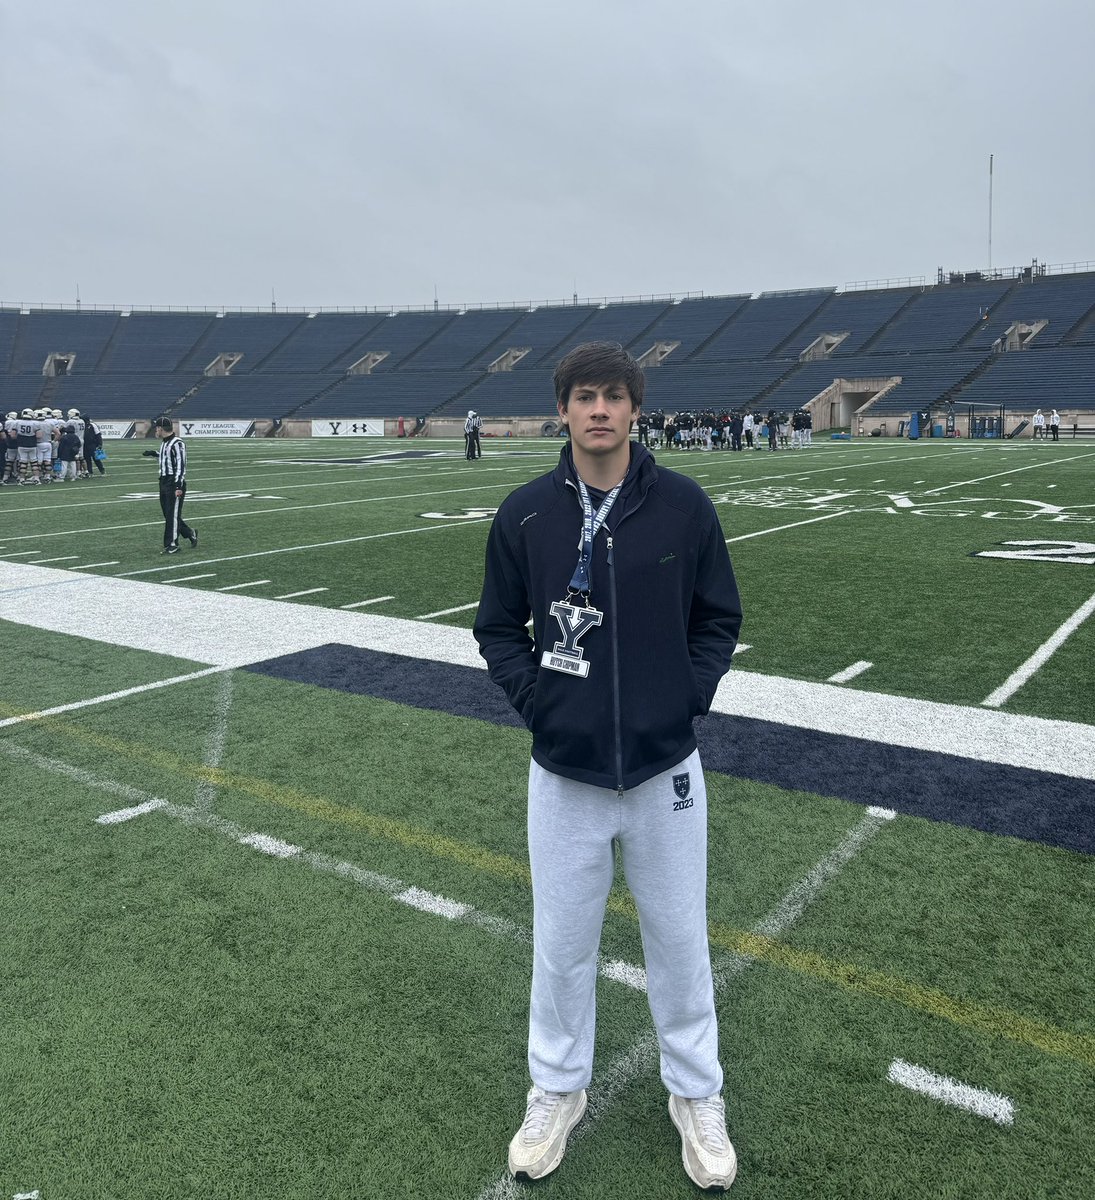 Had a great time visiting Yale for spring practice today and talking to @paupaupau5 and @CoachRenoYale about the program! Look forward to coming back soon! @coachbelanger @AlexKurtzYale @ESDFootball_